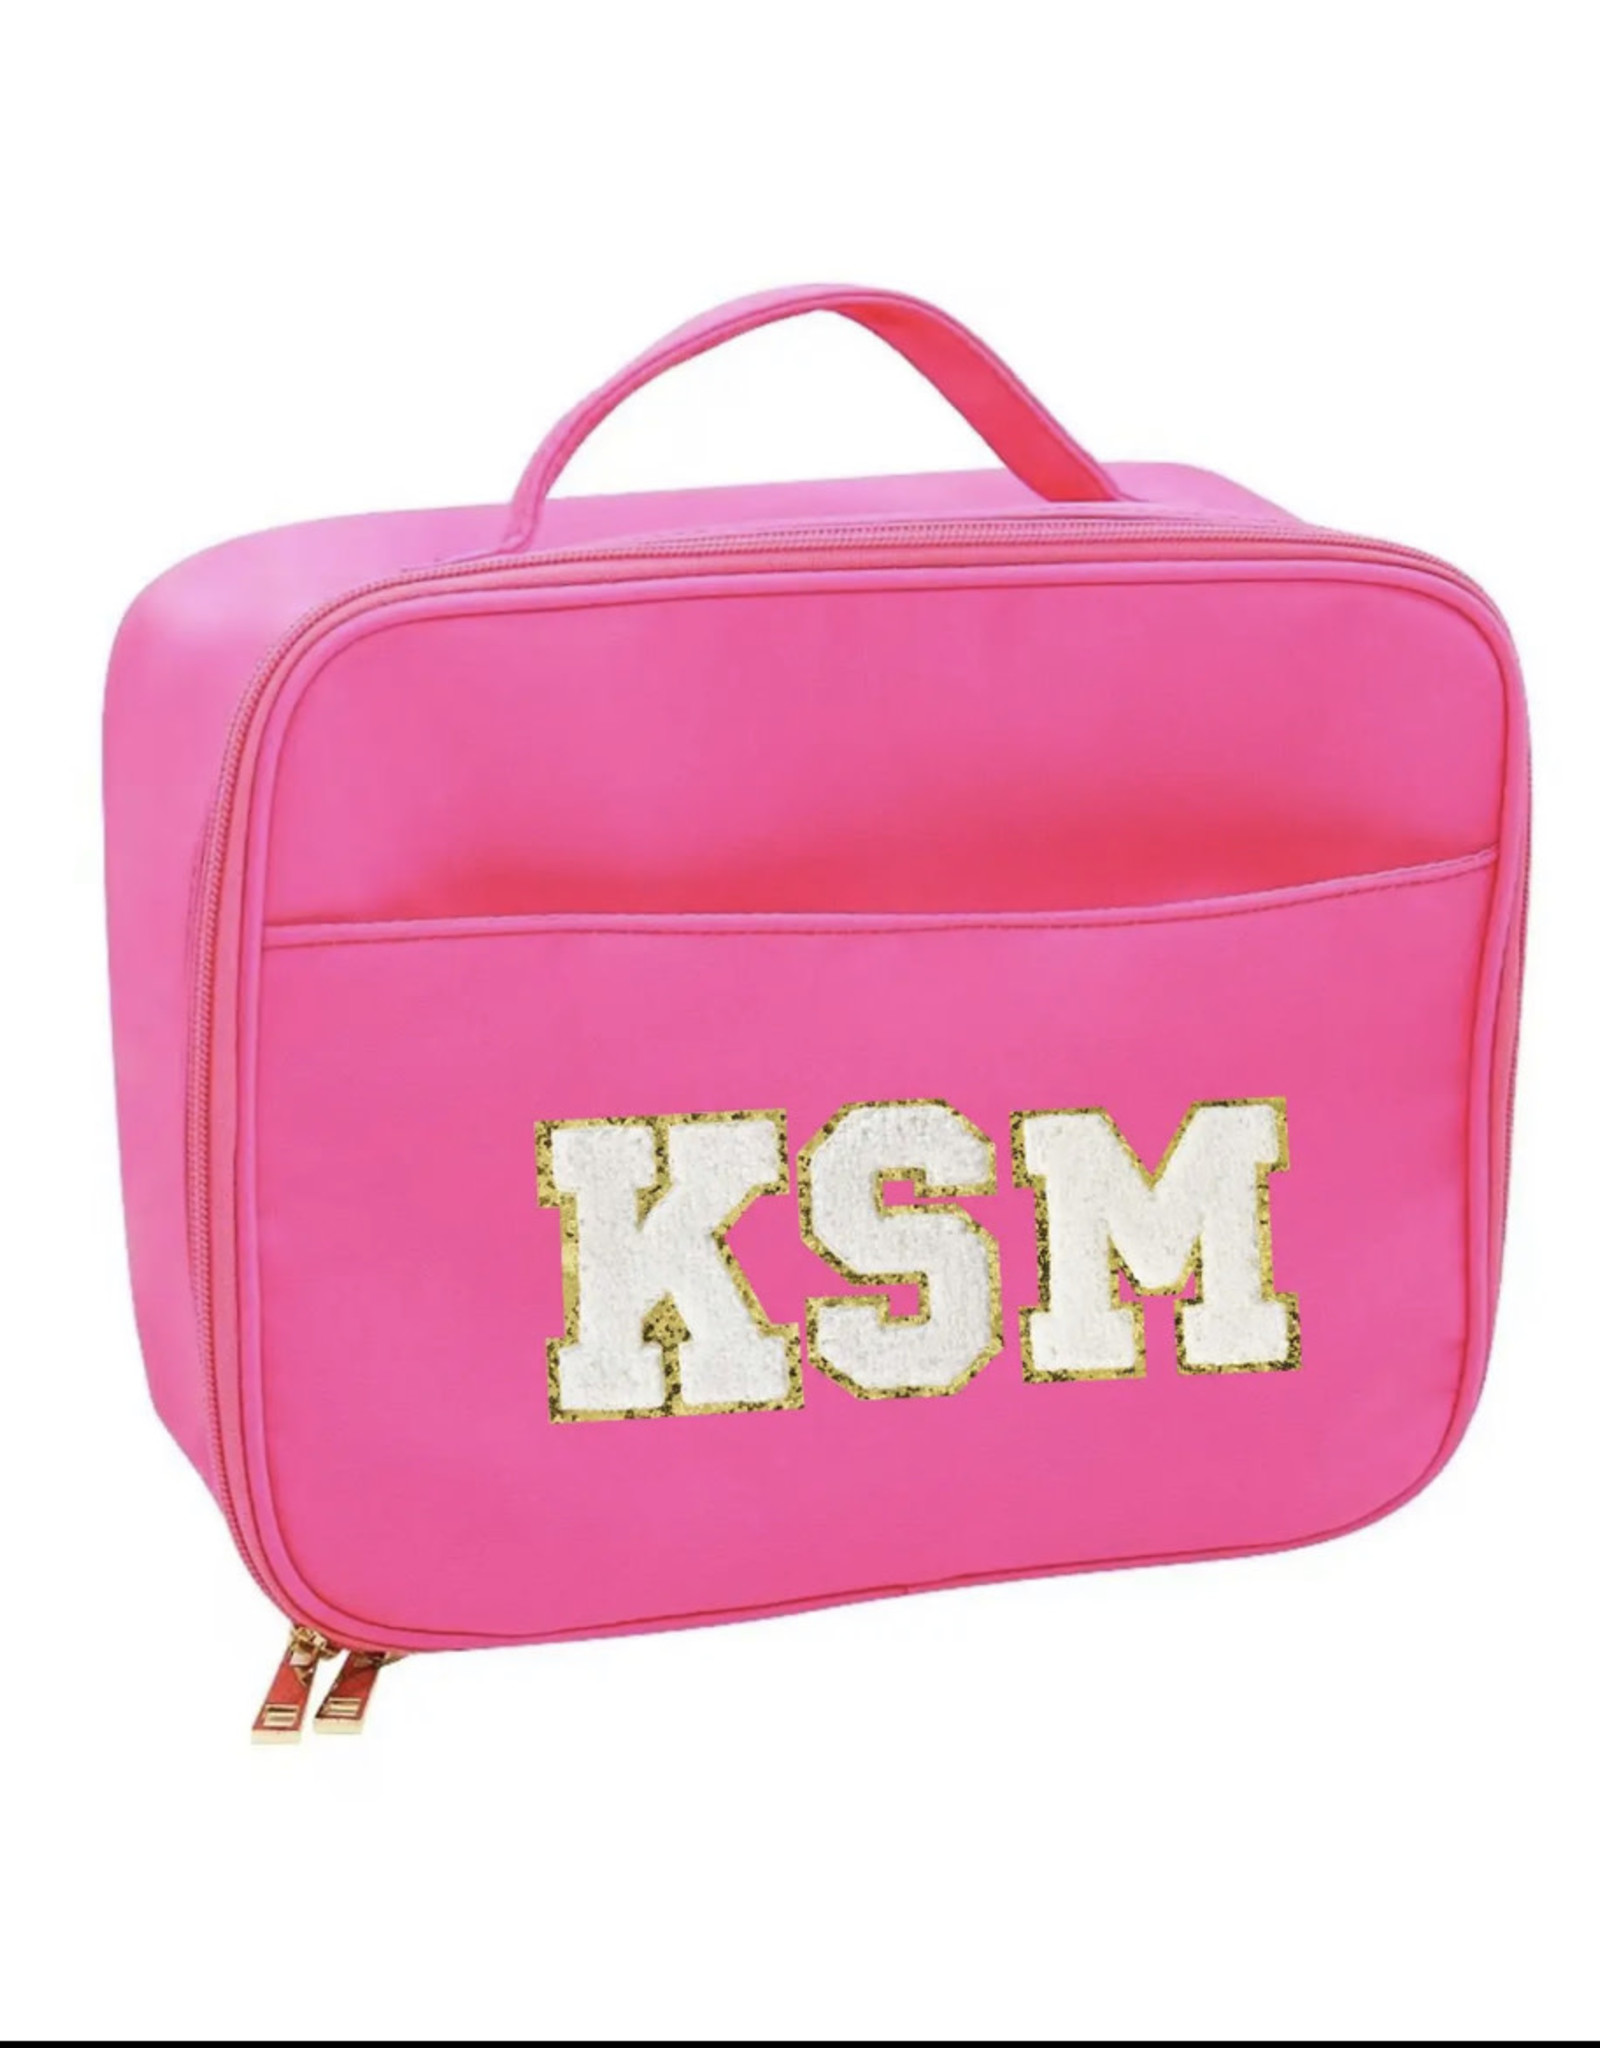 Varsity Collection Nylon Lunch Bag Box Hot Pink